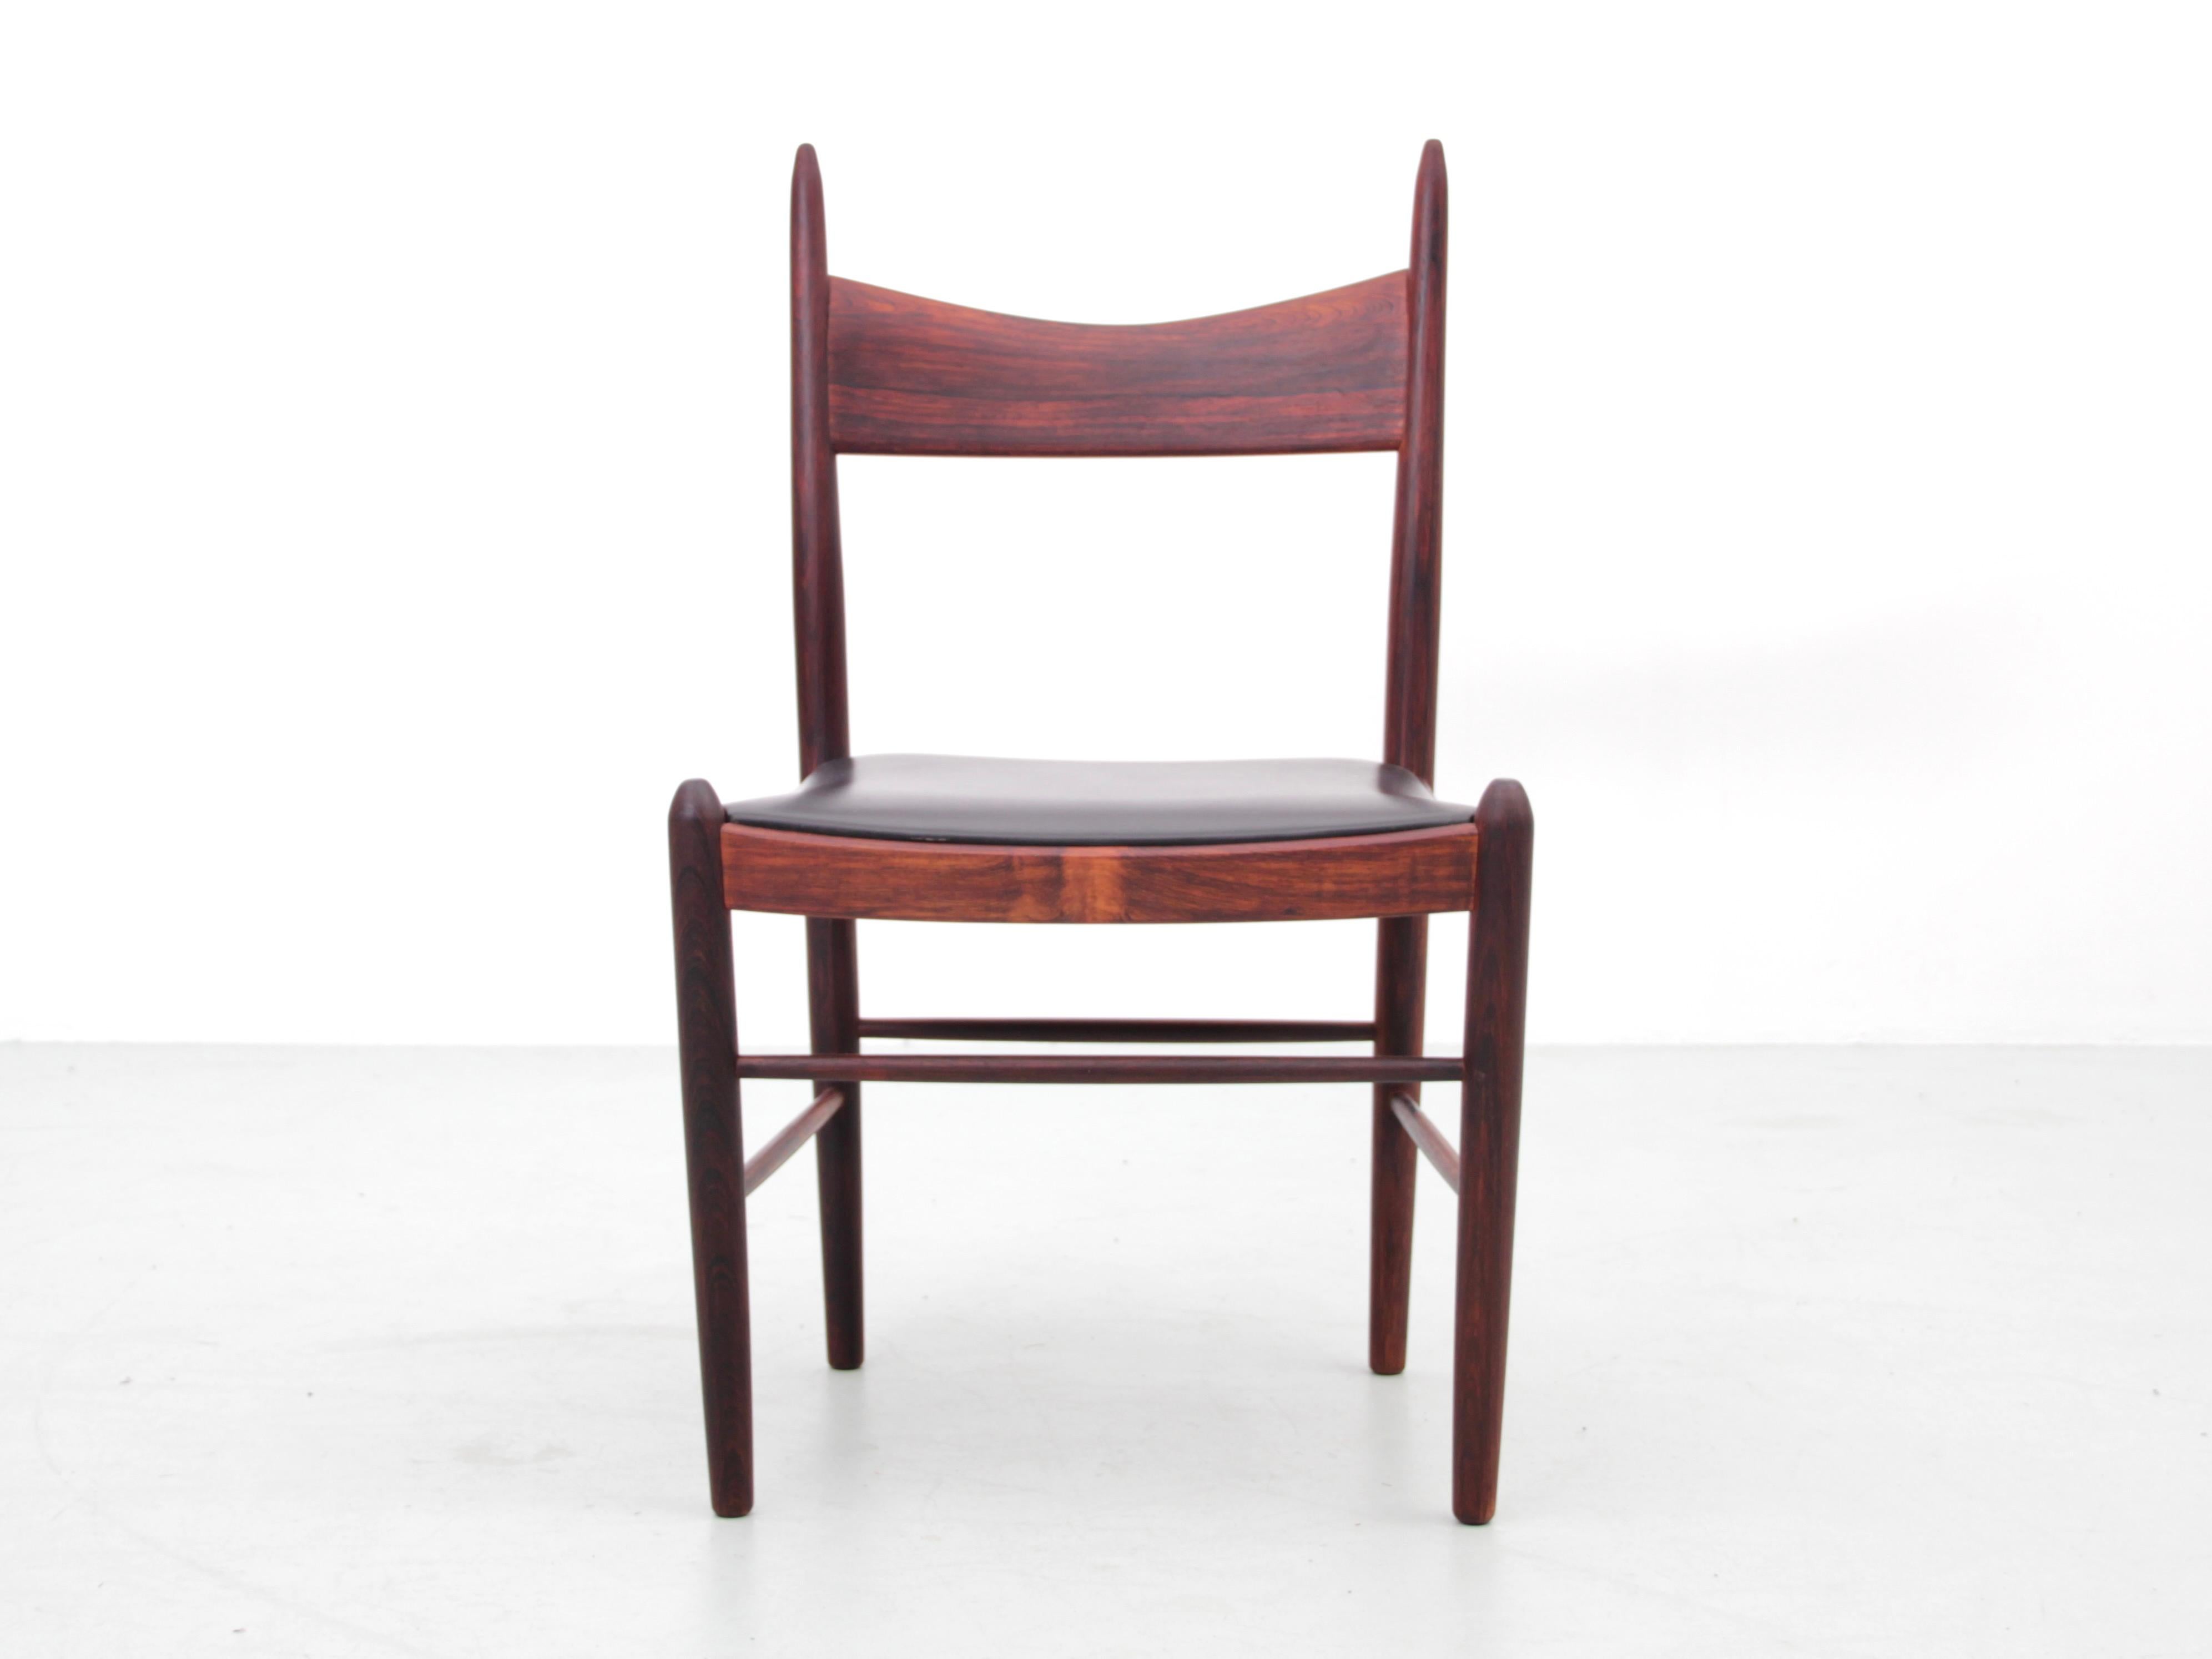 Mid-Century Modern set of 4 dining chairs in Rio rosewood by H. Vestervig Eriksen. Original cognac leather seat.